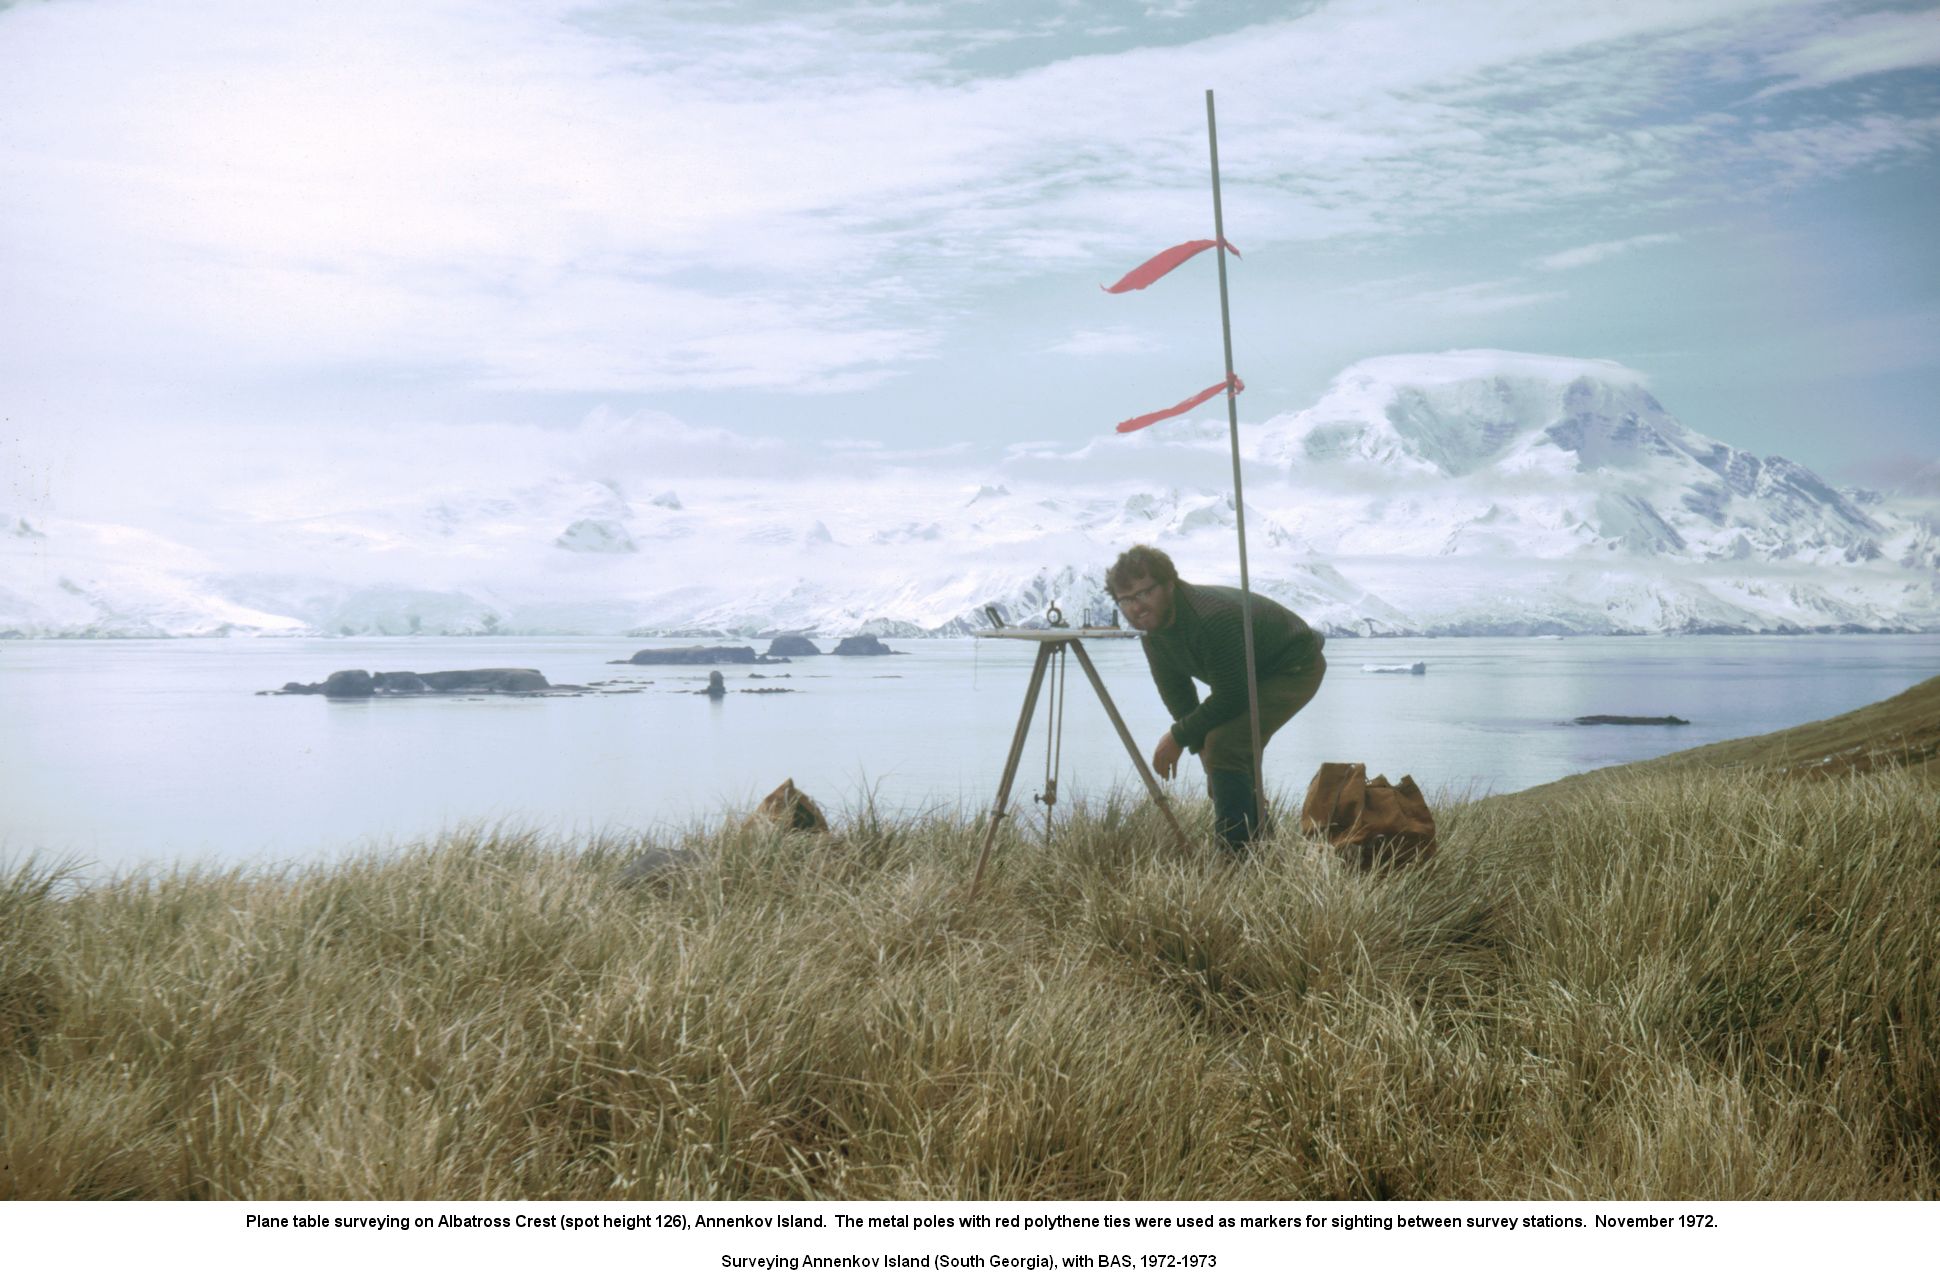 Plane table surveying on Albatross Crest (spot height 126), Annenkov Island.  The metal poles with red polythene ties were used as markers for sighting between survey stations.  November 1972.